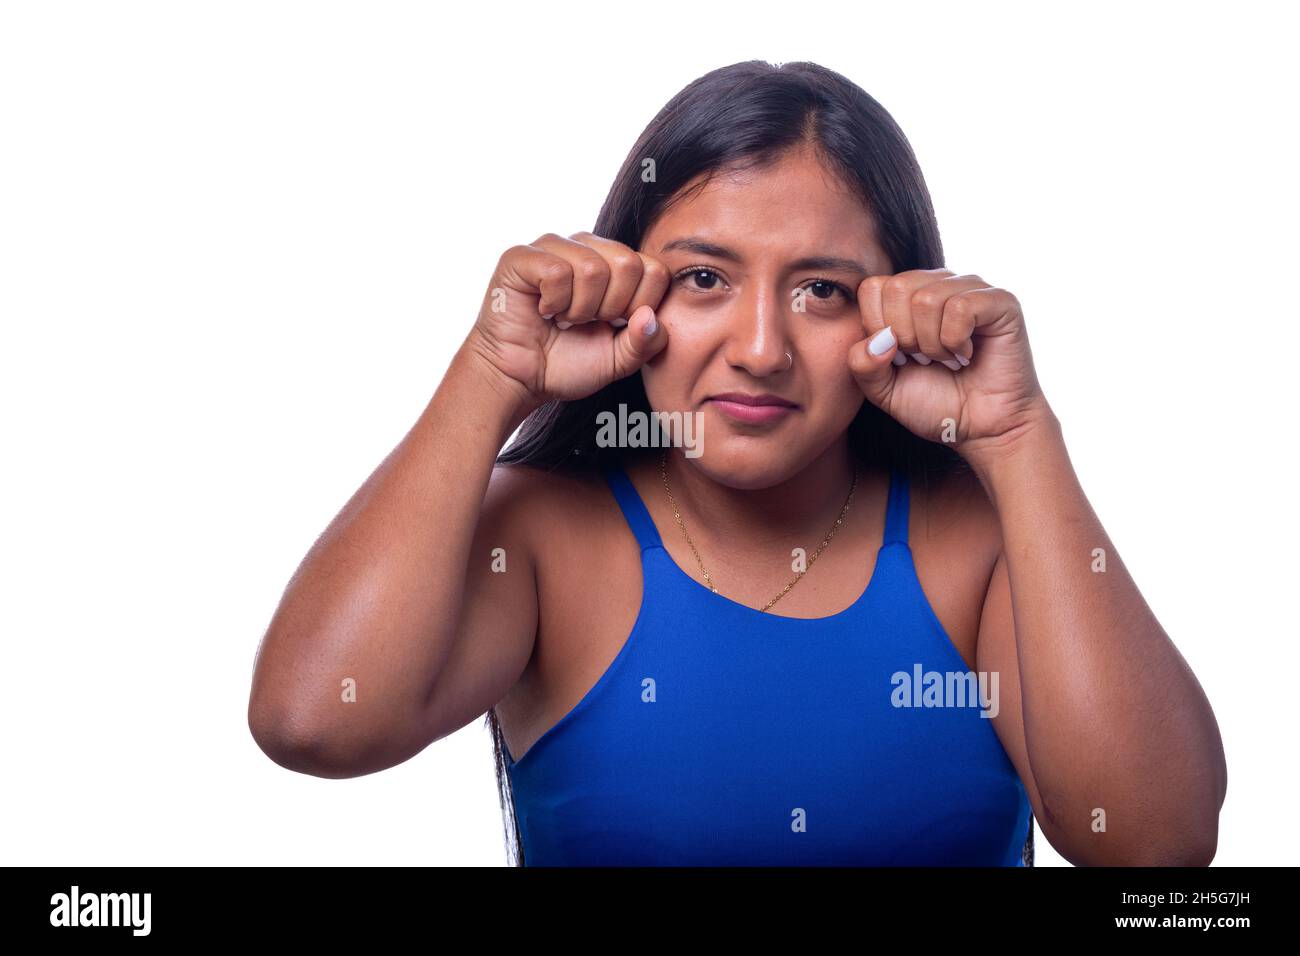 Dramatic woman making a crying face. Sad and crying black woman isolated on all white background. Stock Photo